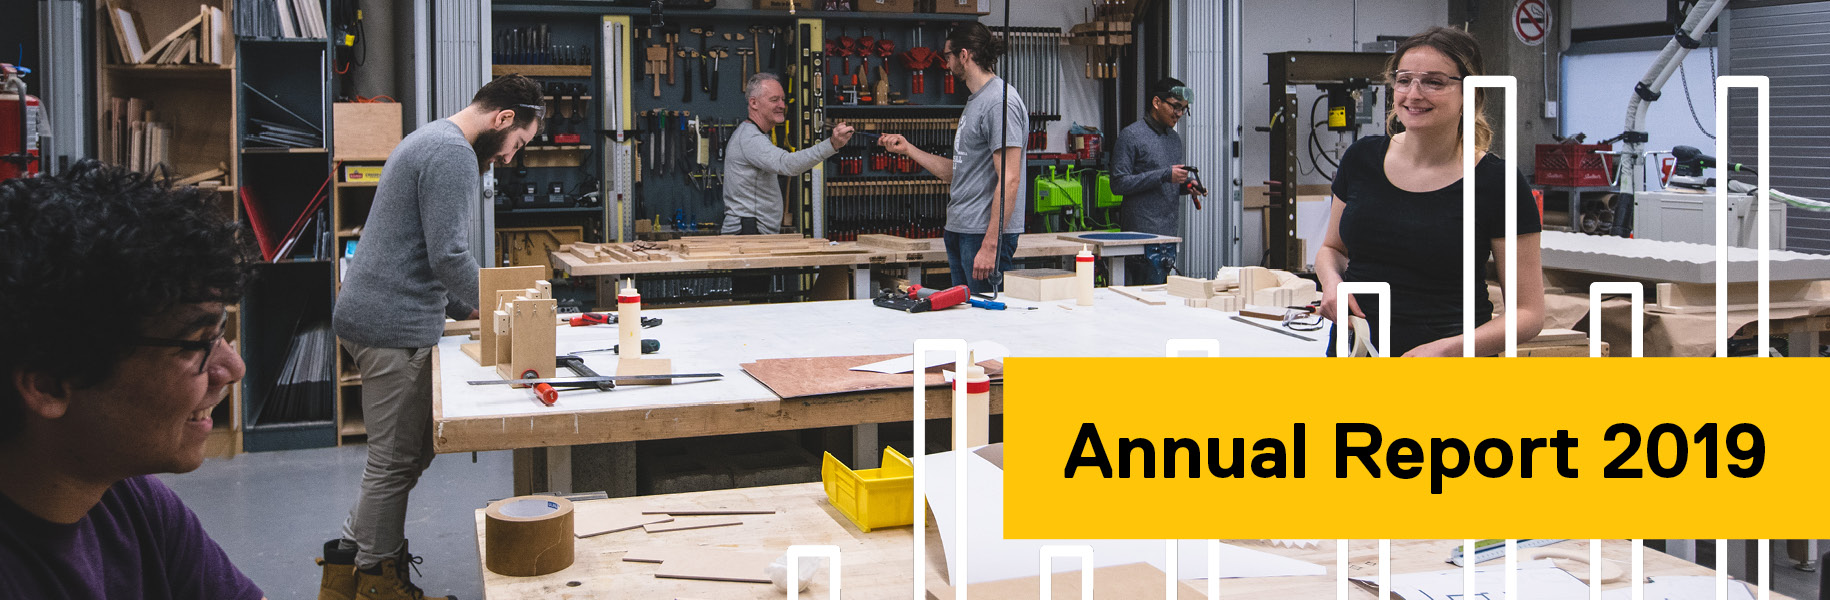 Annual Report 2019: A group of architecture students in a workshop.